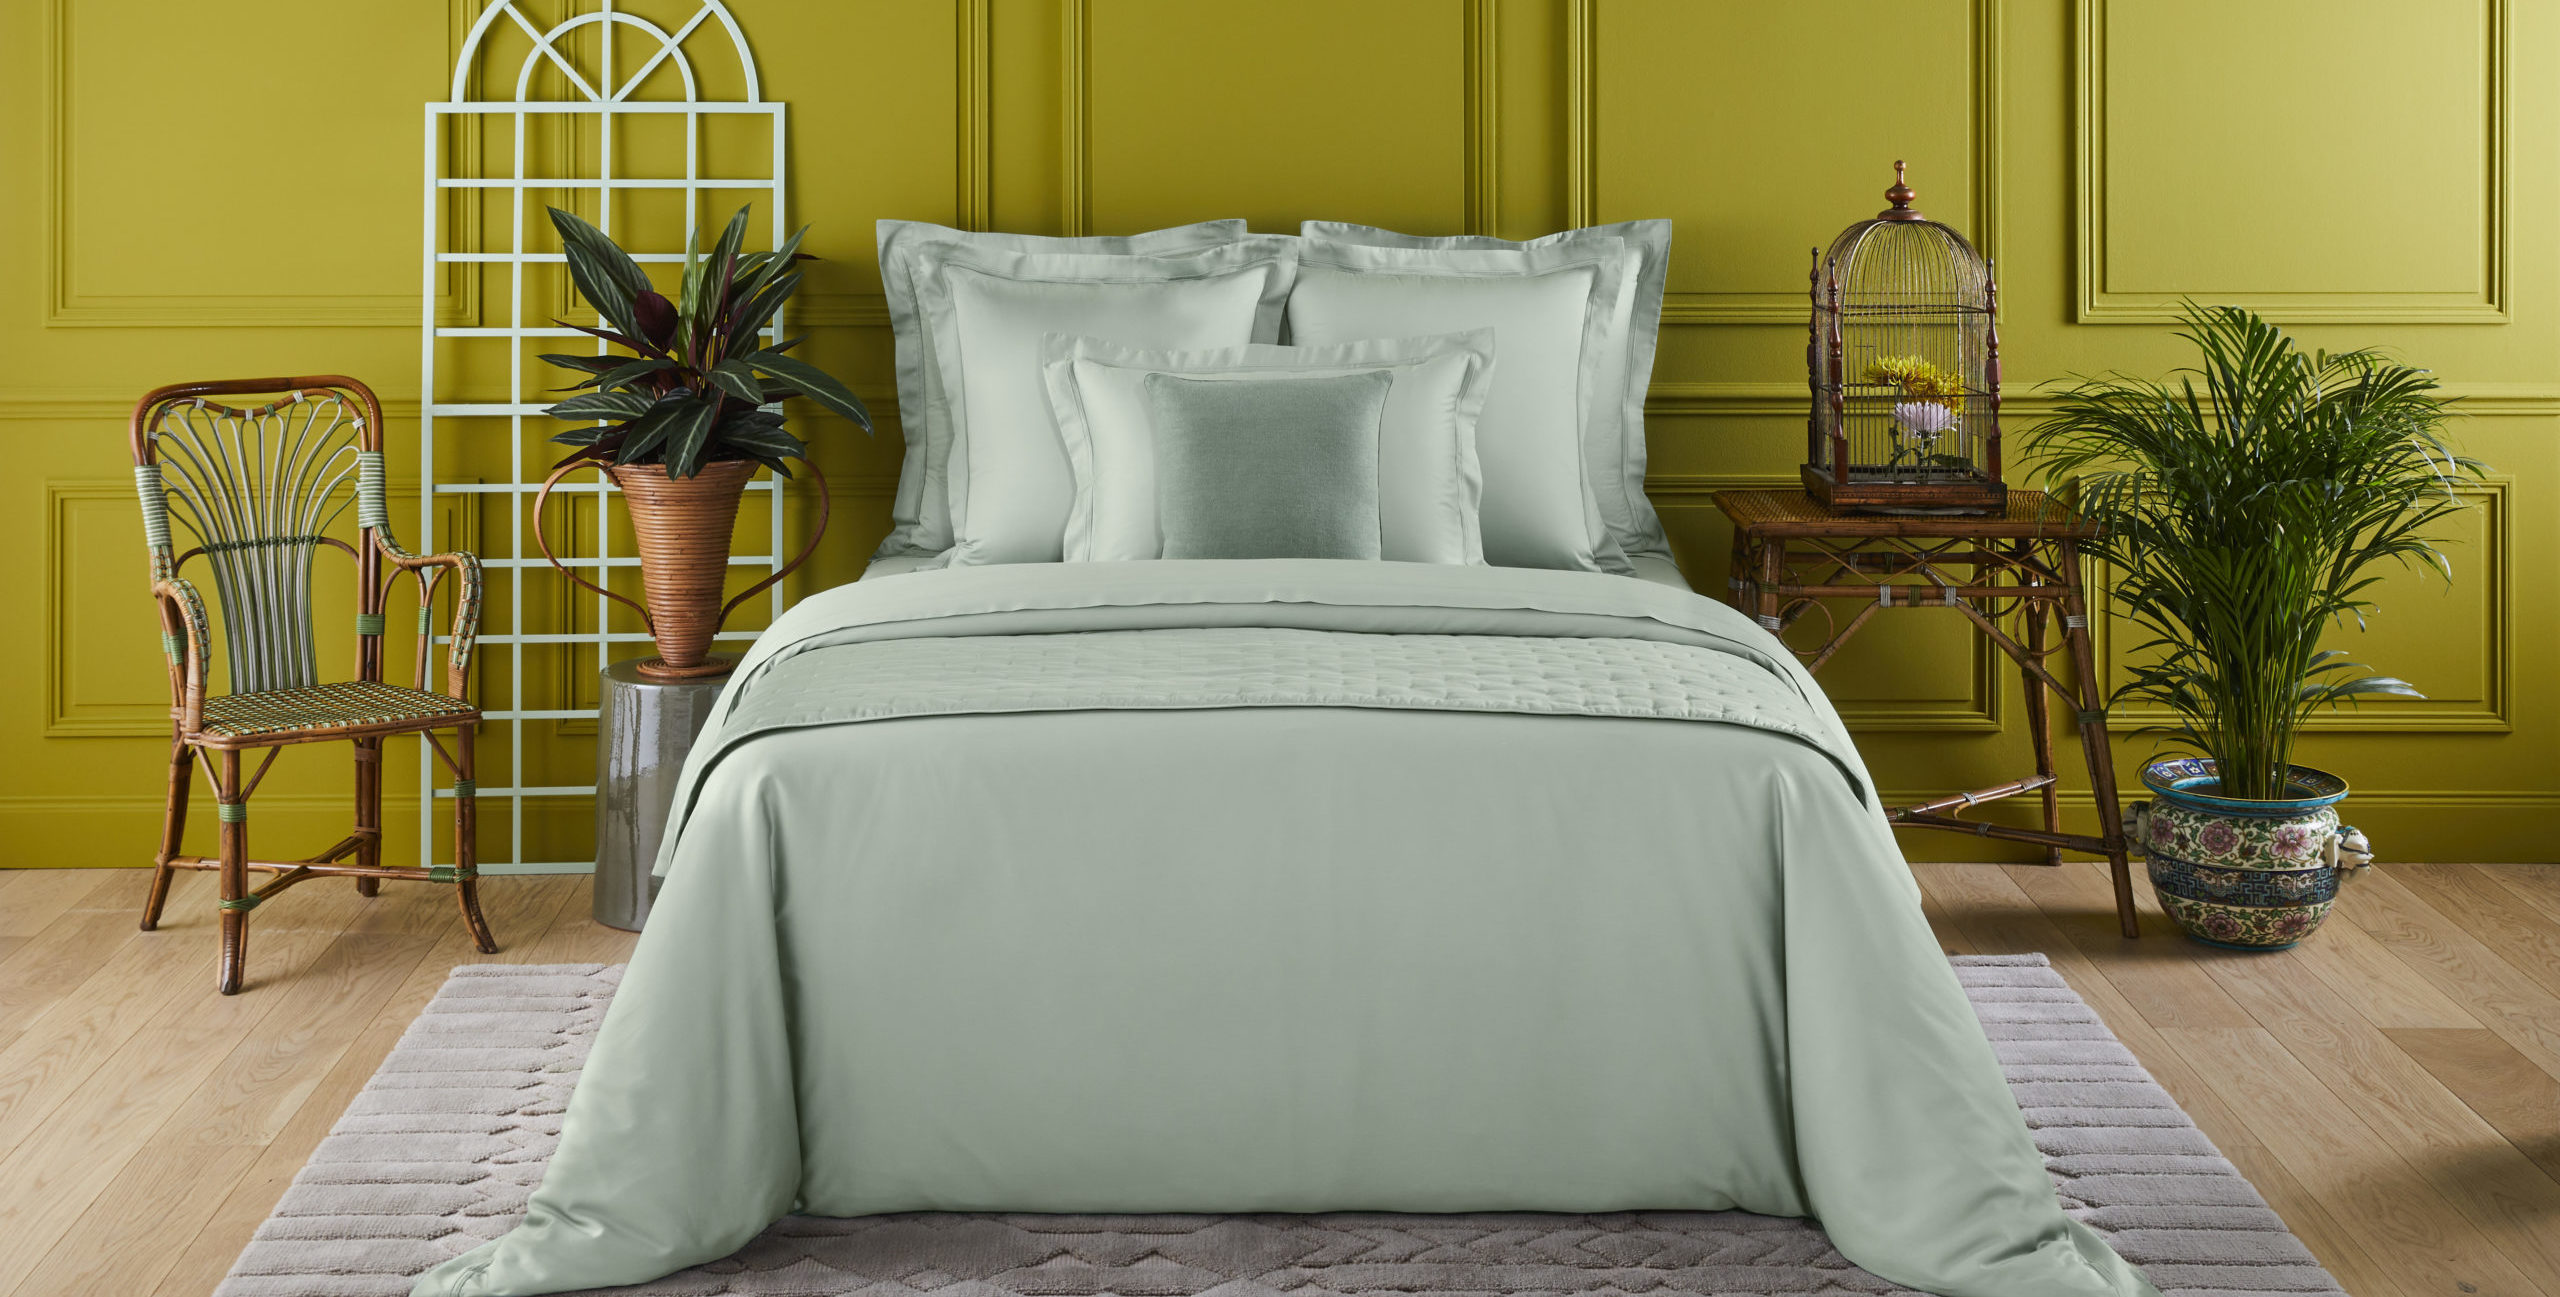 Bed Linens VERONESE - TRIOMPHE - Yves Delorme - Triomphe-Veronese Lit-Ambiance - 1